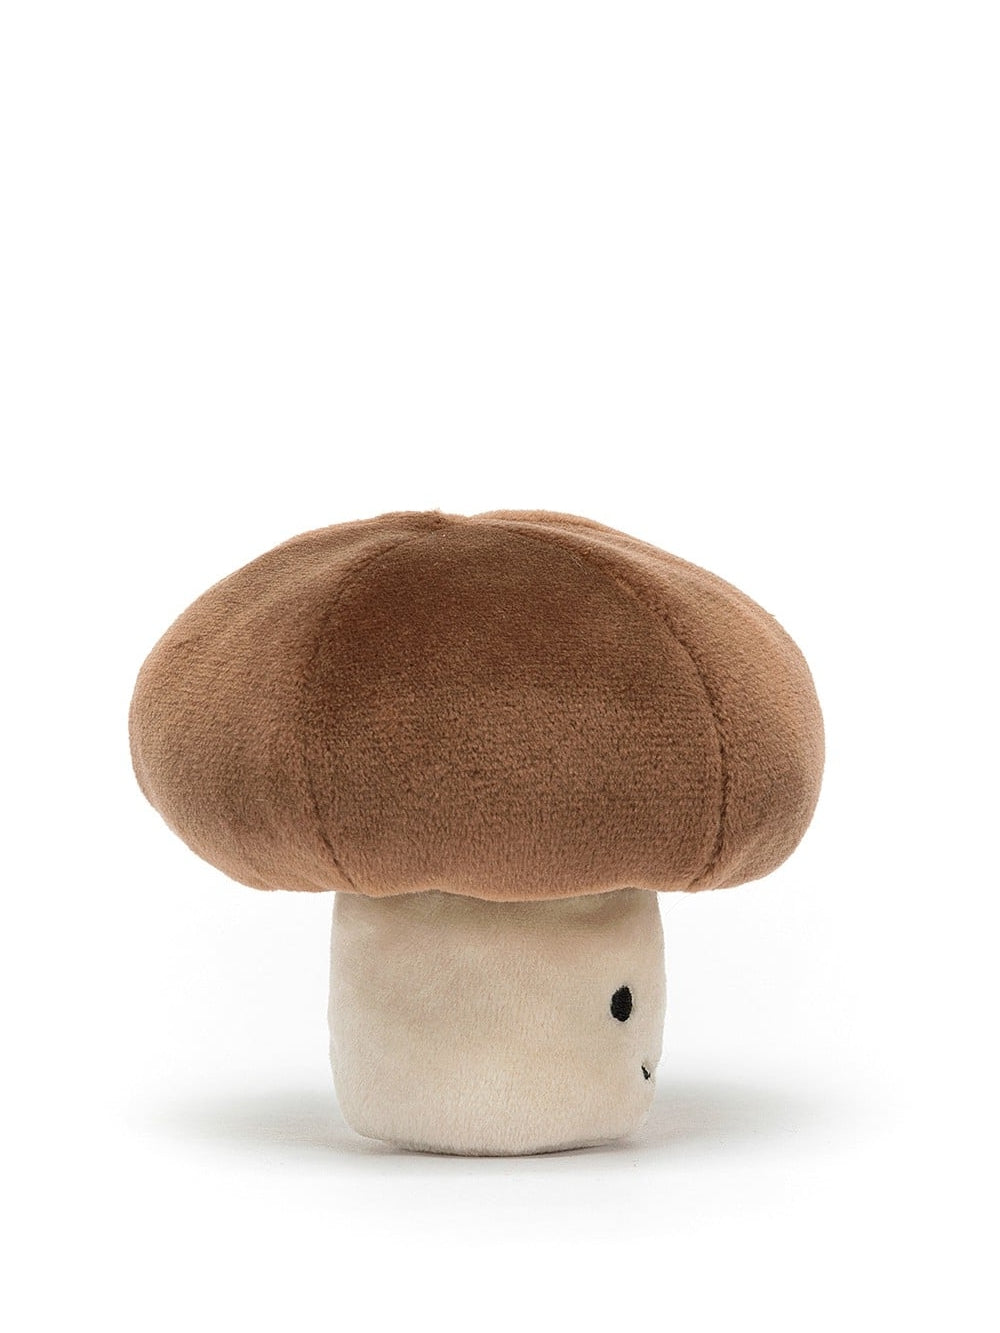 JELLYCAT: Vivacious Vegetable Mushroom soft toy, brown – My o My